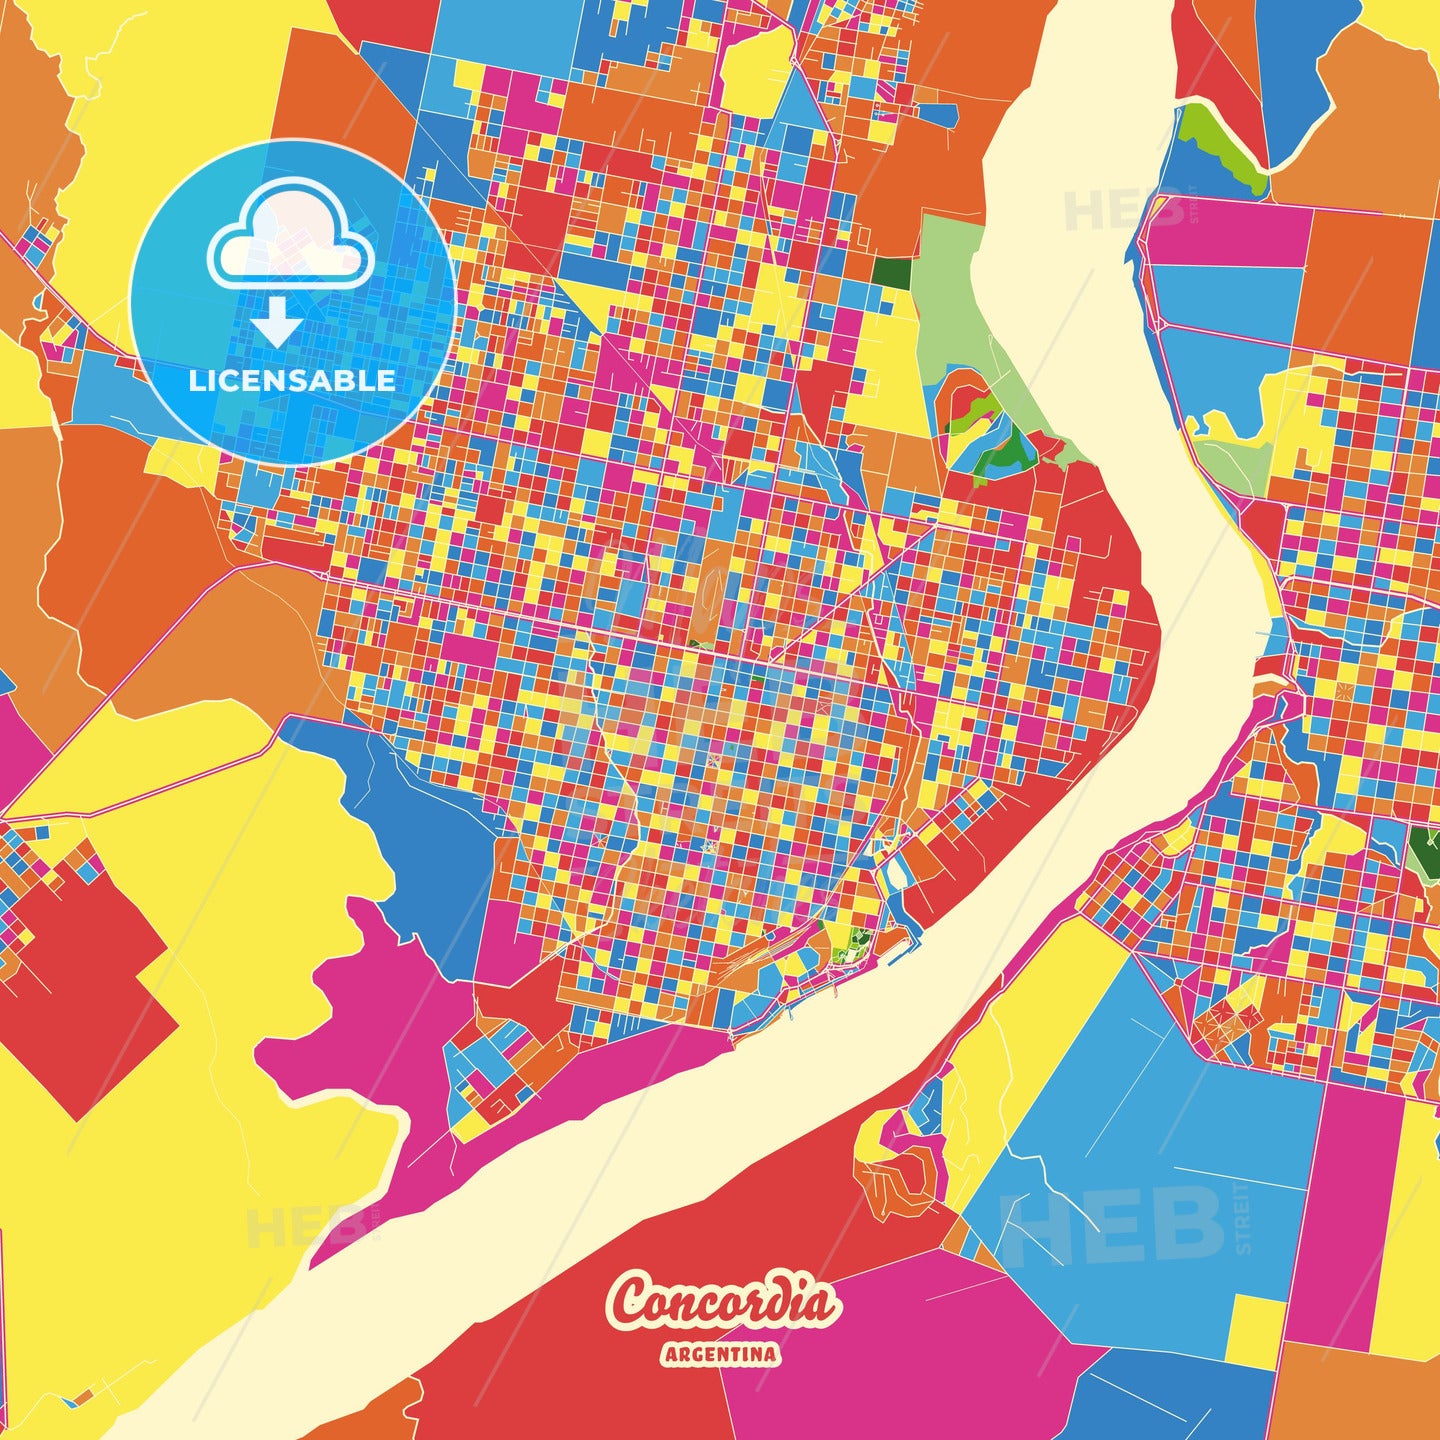 Concordia, Argentina Crazy Colorful Street Map Poster Template - HEBSTREITS Sketches